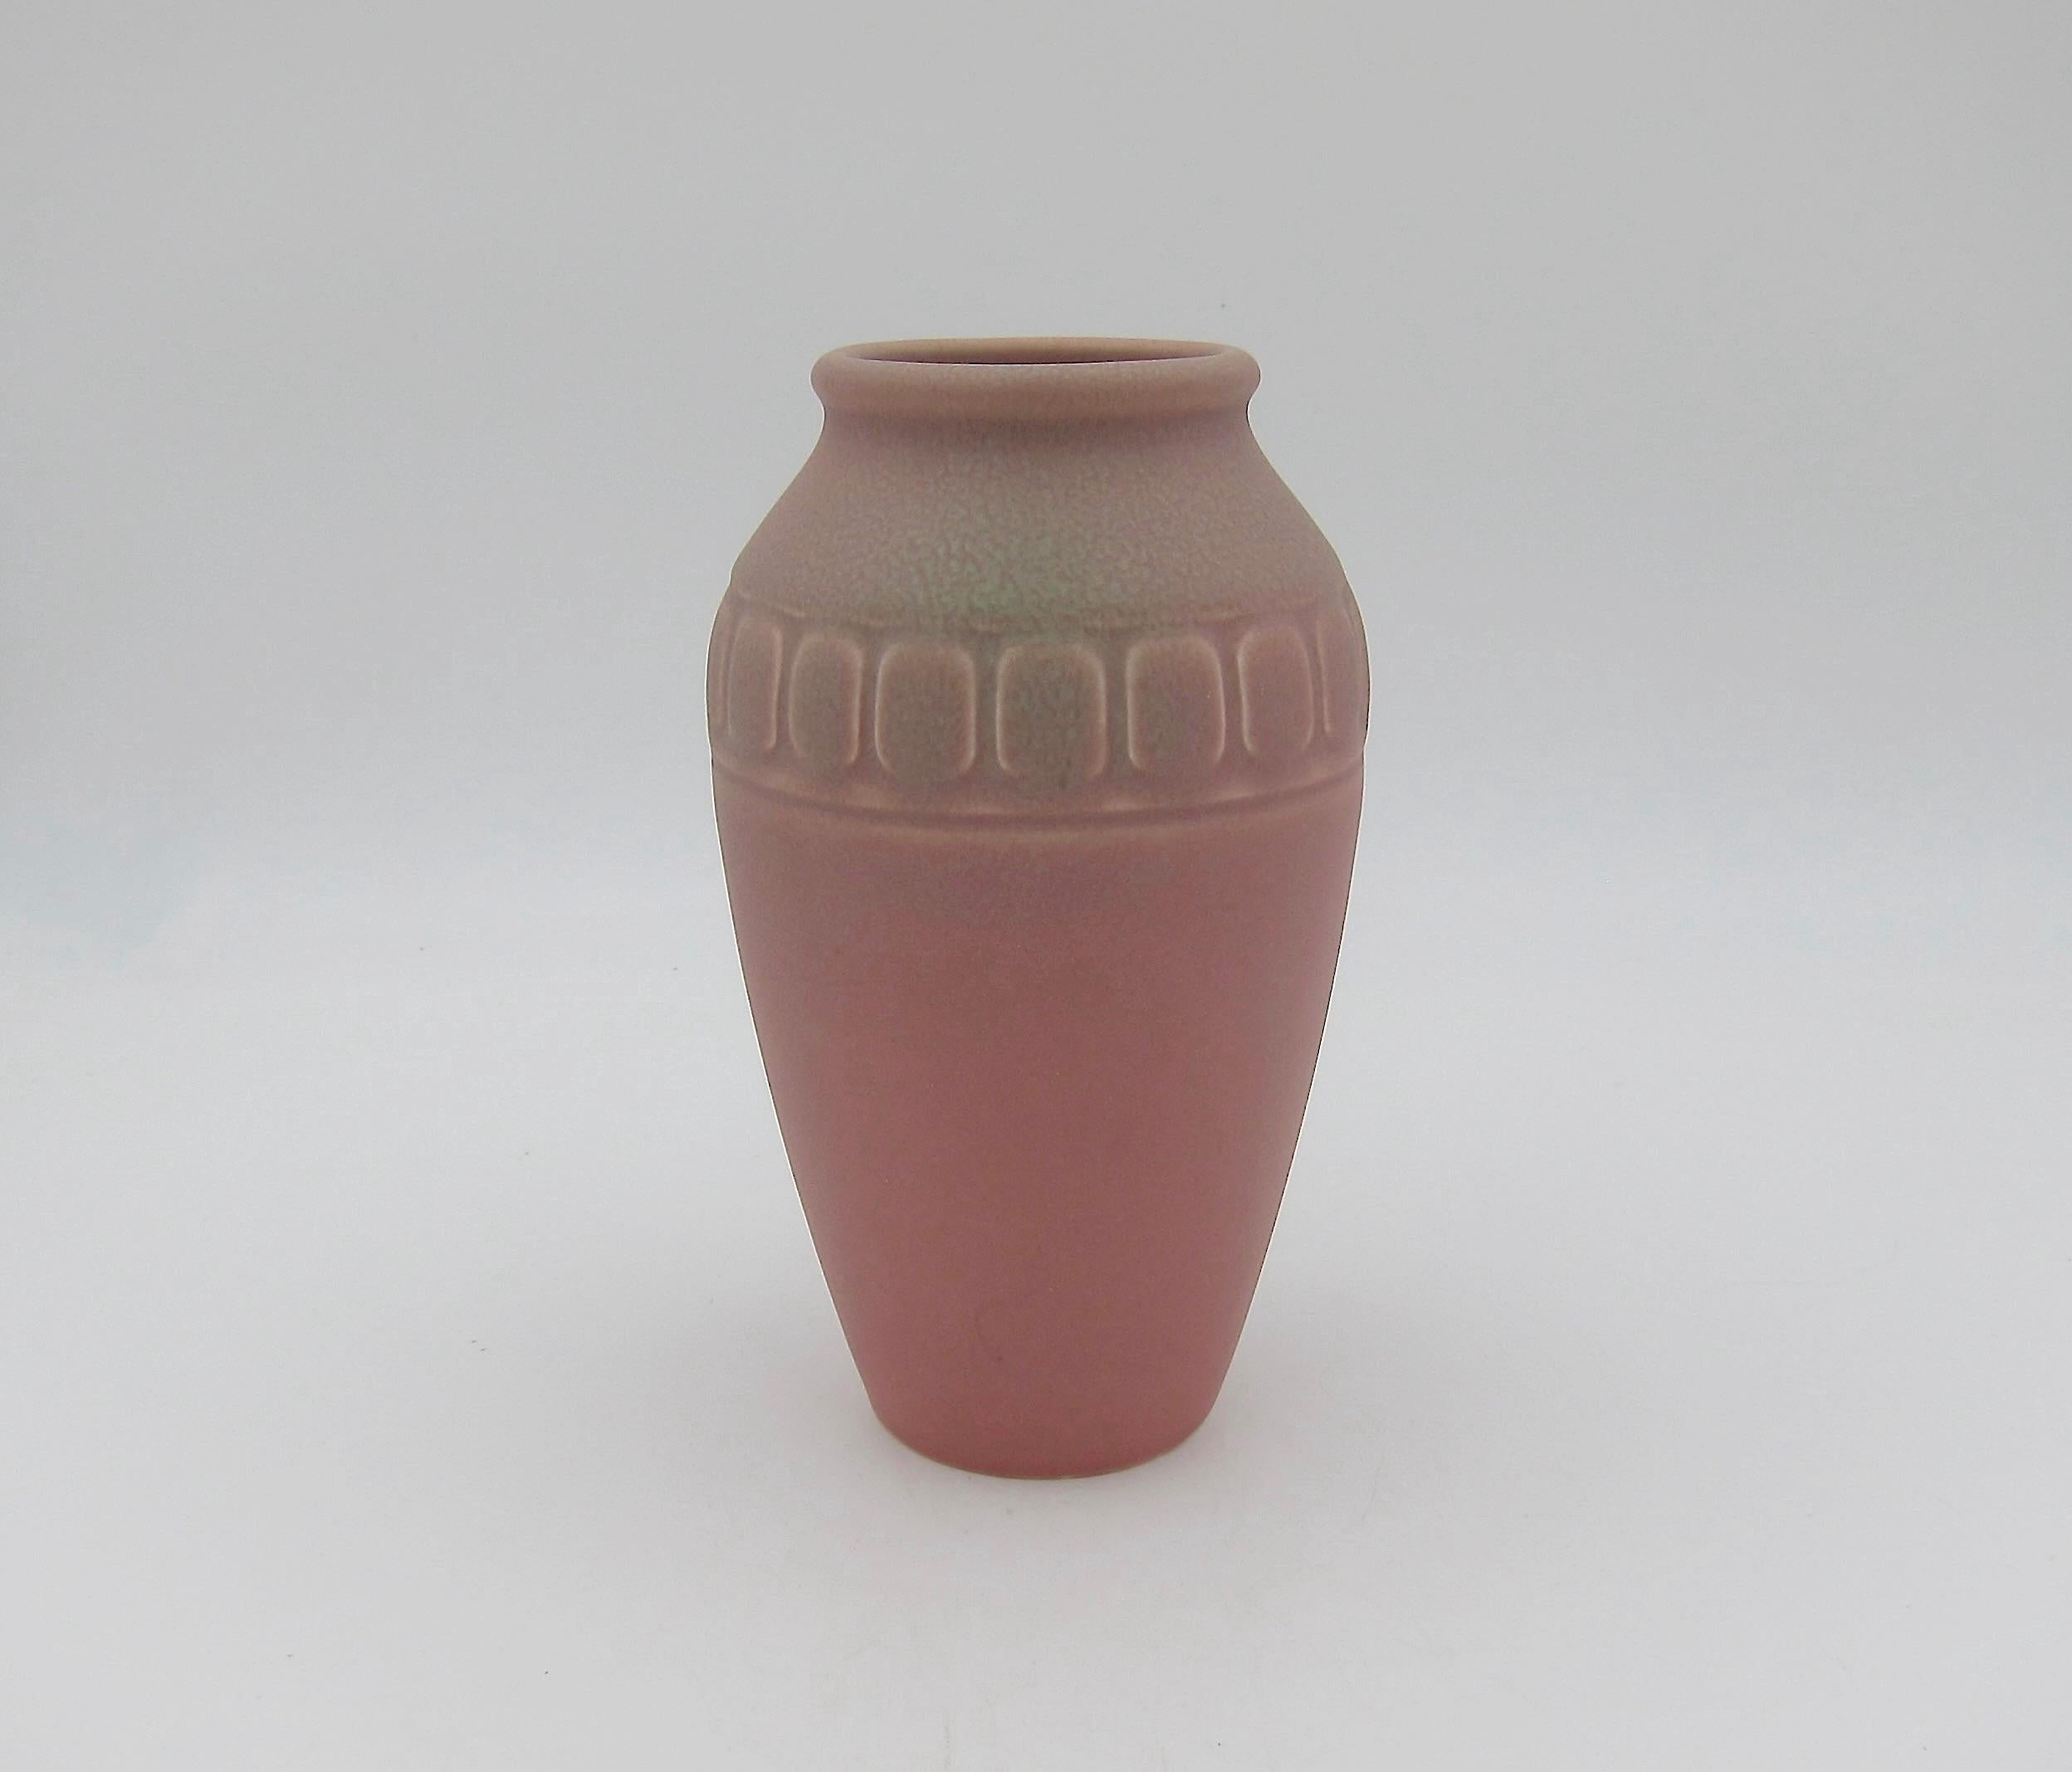 A vintage Rookwood Pottery vase date marked 1926. The American art pottery Arts & Crafts production vase is decorated with an artistic matte glaze of a velvety dusty rose-pink with mottled accents of pale green around the mouth, rim, and